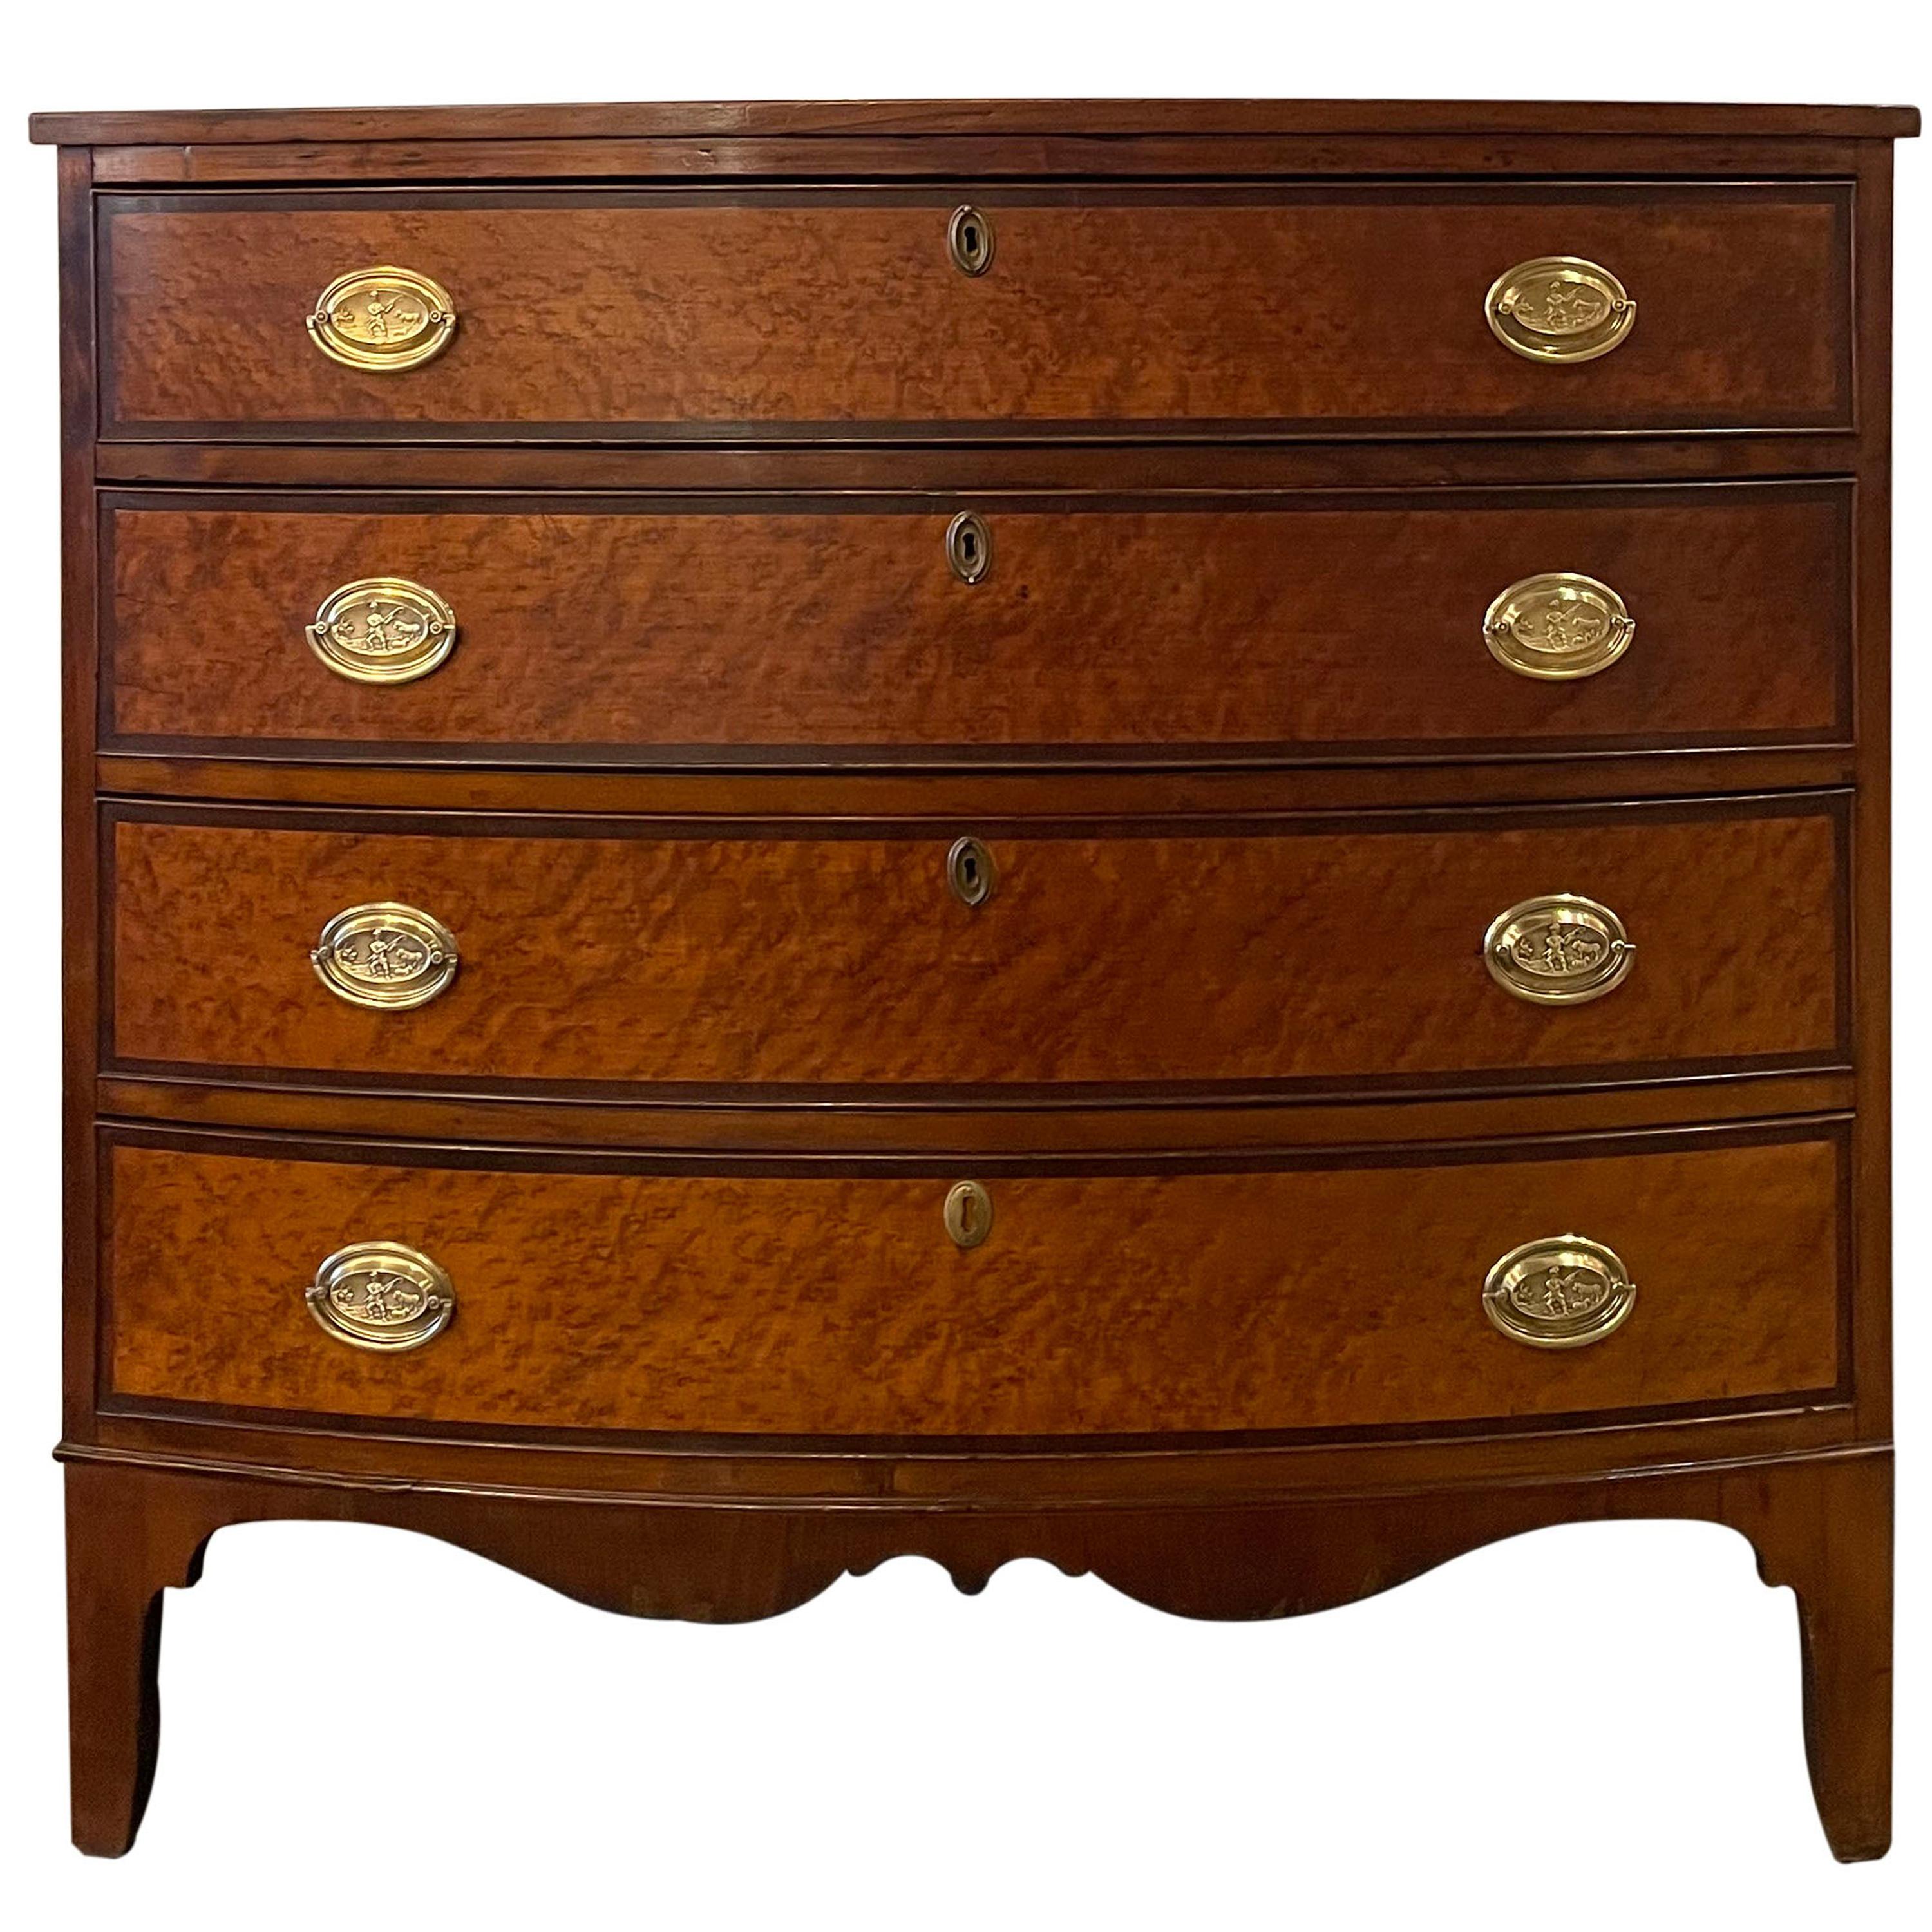 Early 19th Century American Figured Mahogany Bow Front Chest For Sale